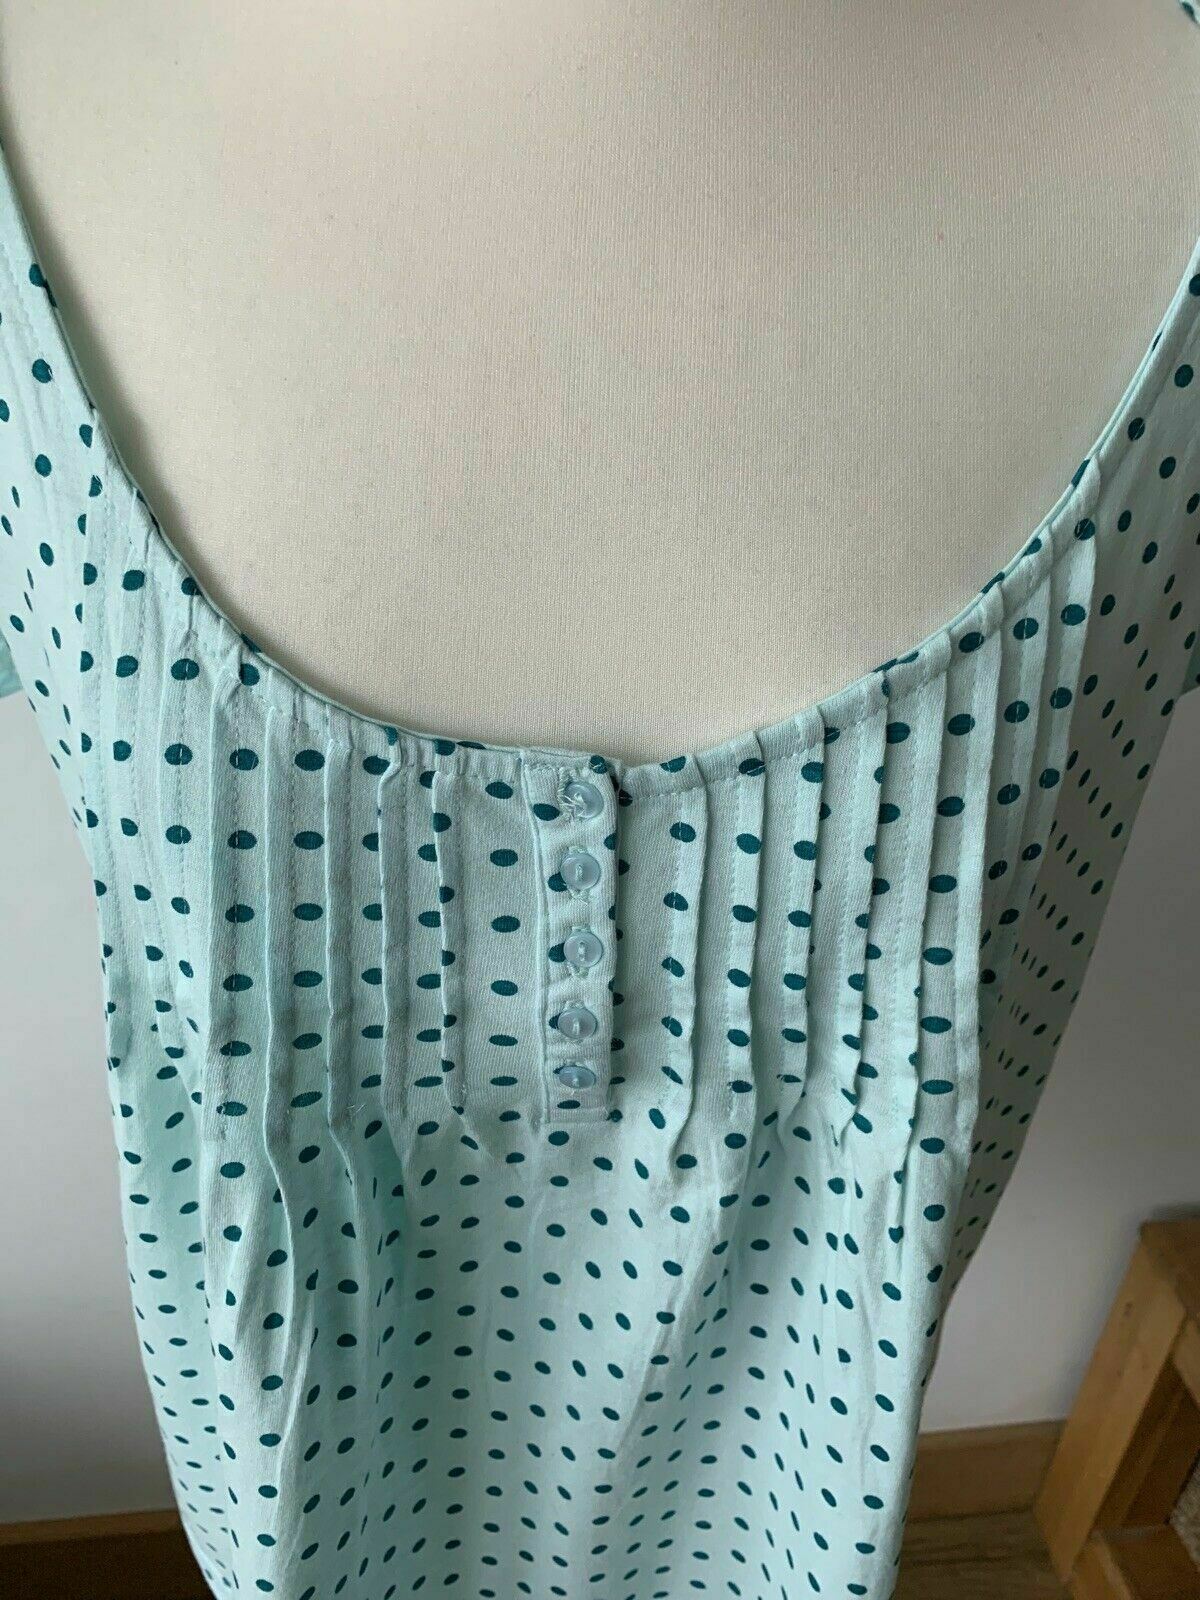 Blancheporte Light Teal Polka Dot Top Cotton Size 14 Pit to Pit 18"